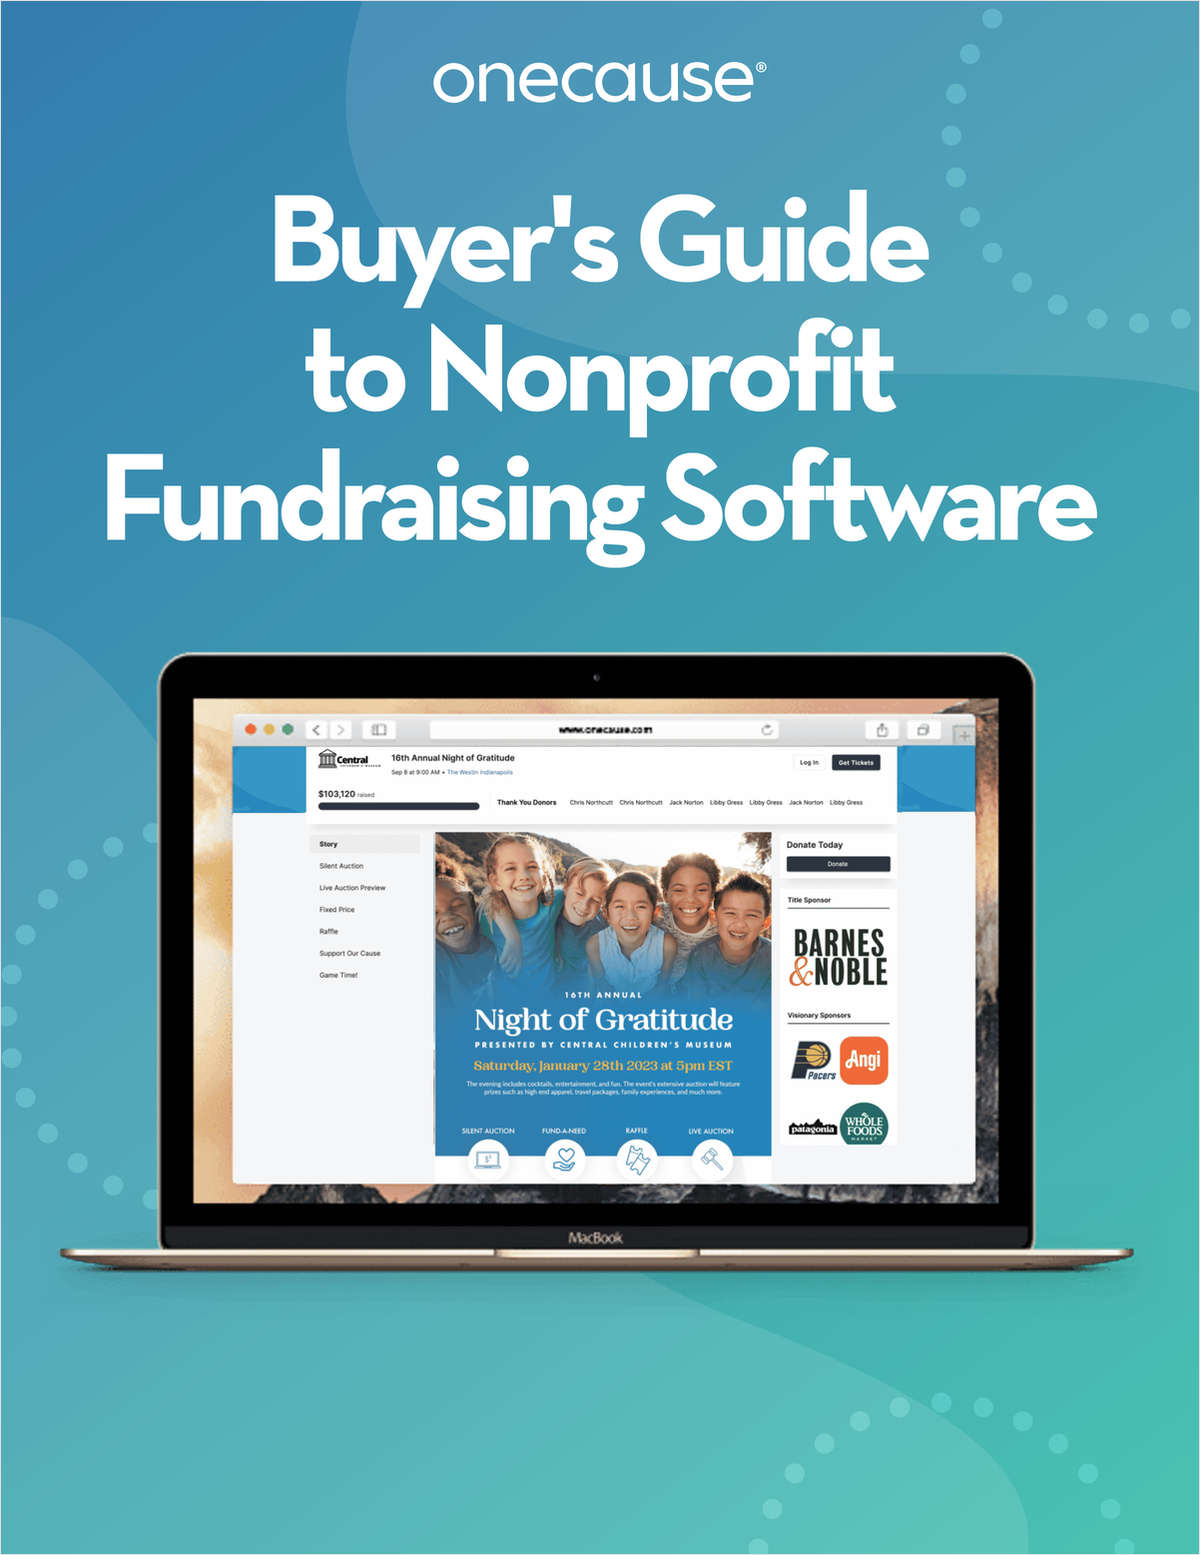 Complete Buyer's Guide to Nonprofit Fundraising Software